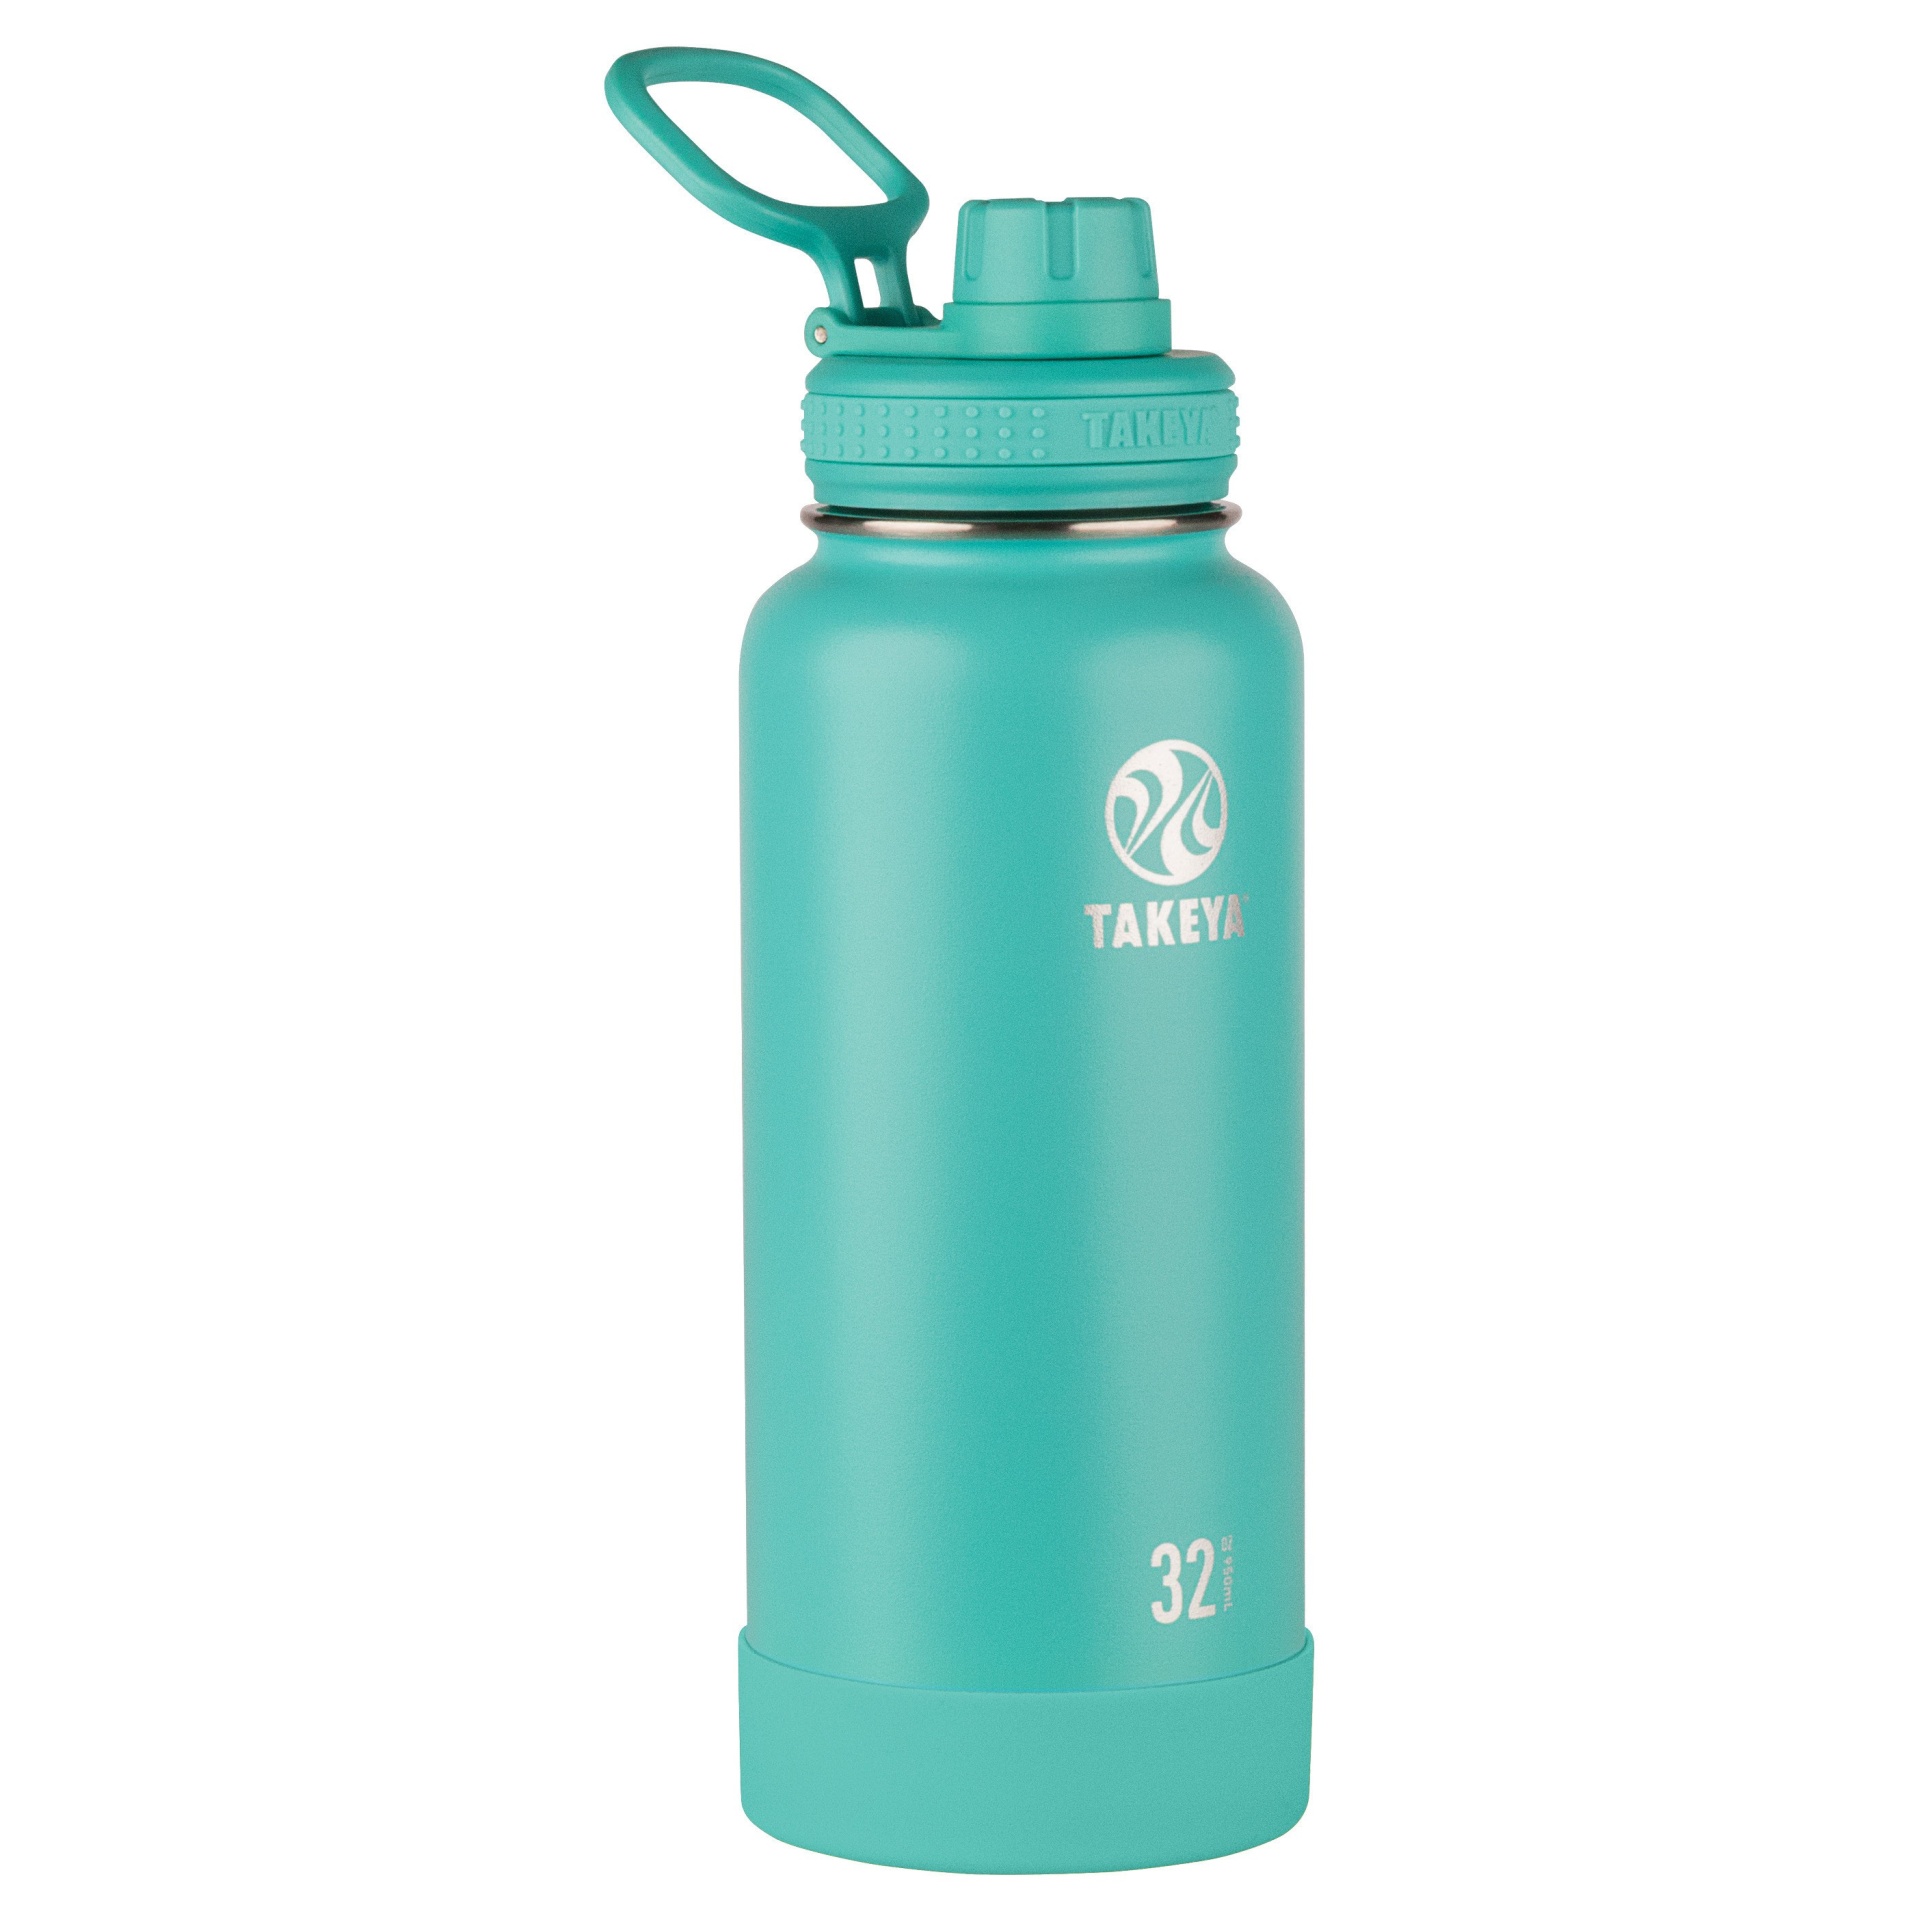 slide 1 of 5, Takeya Actives Insulated Stainless Steel Water Bottle with Insulated Spout Lid - Teal Blue, 32 oz